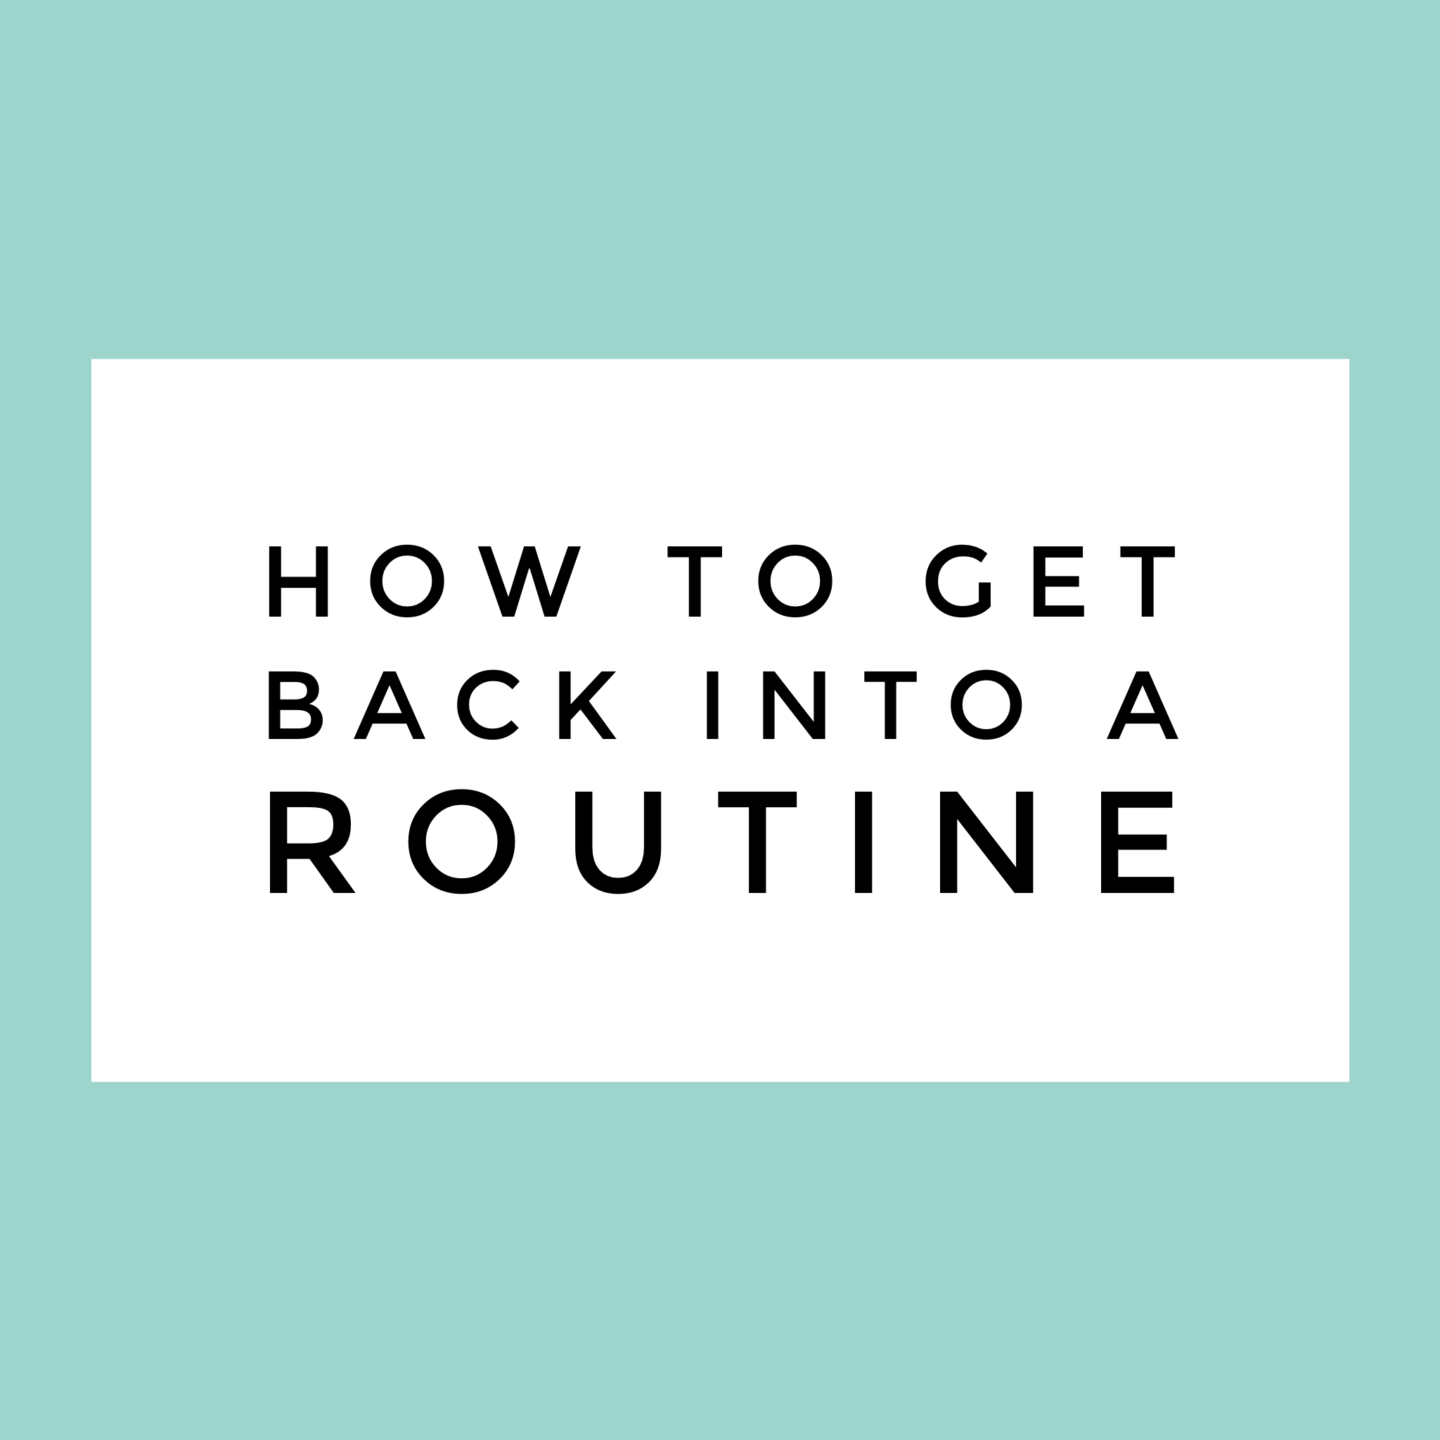 How to get back into a routine